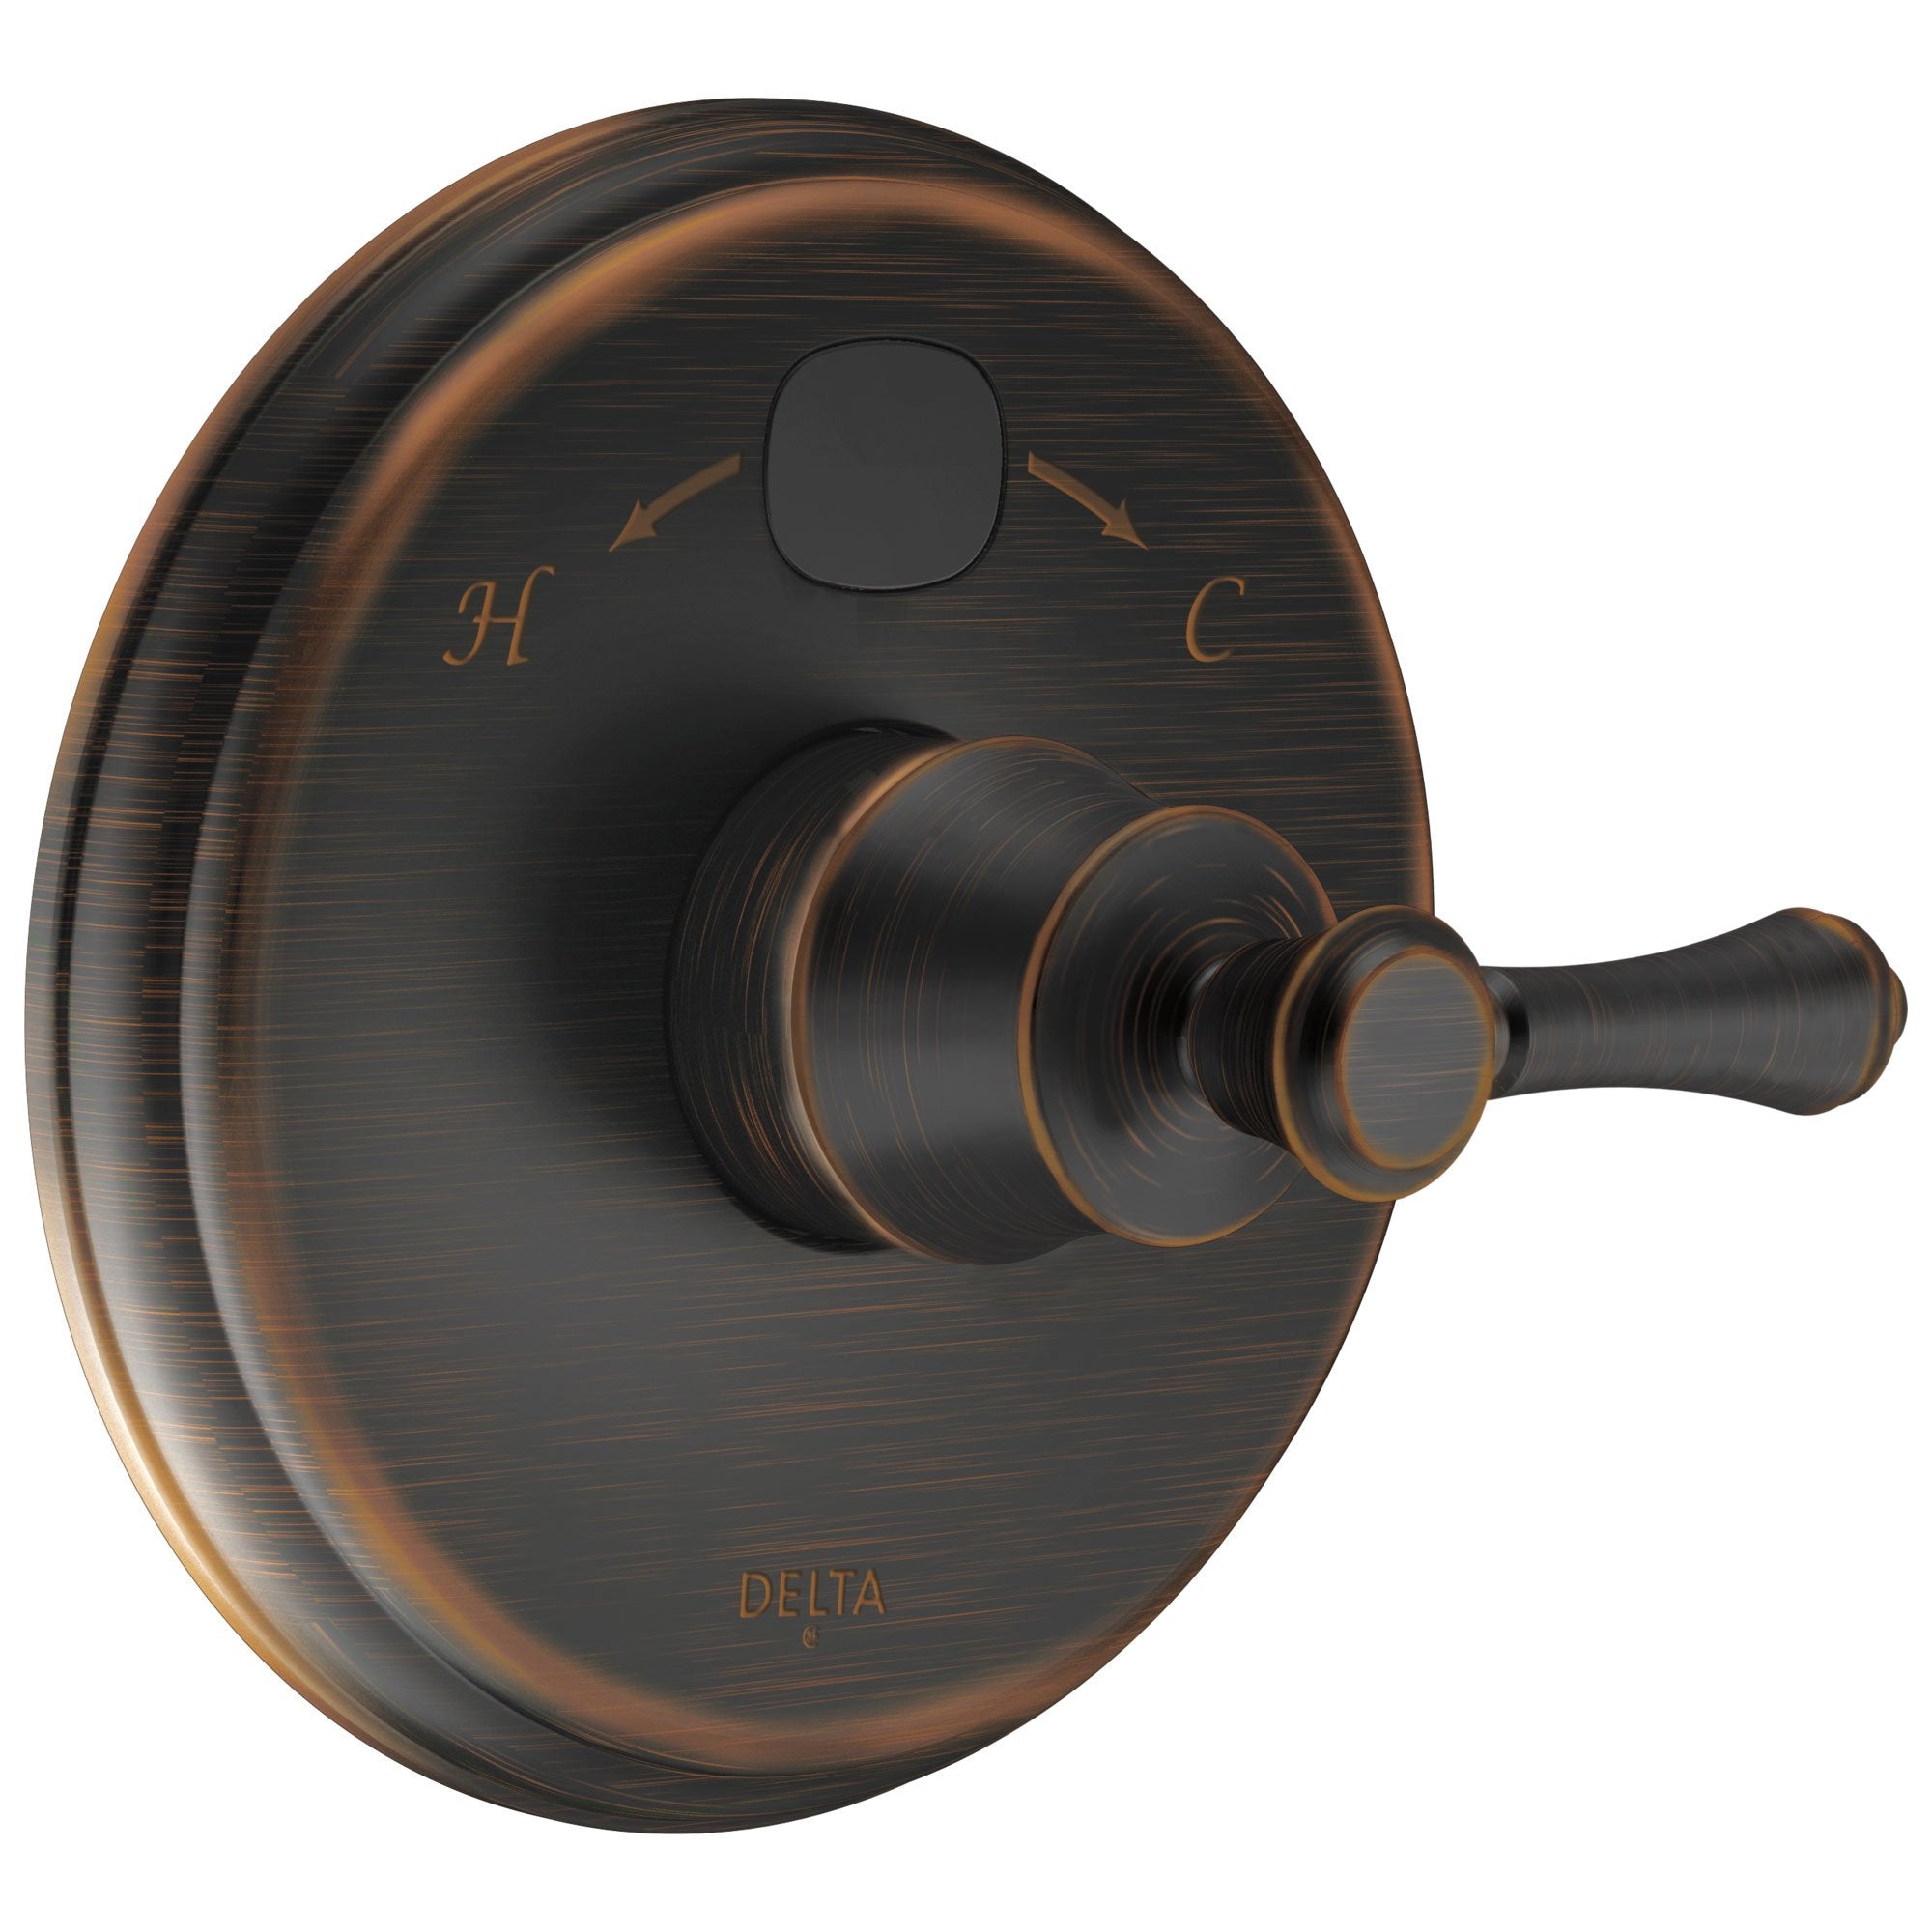 Delta Venetian Bronze Cassidy 14 Series Digital Display Temp2O Shower Valve Control COMPLETE with Single Lever Handle and Rough-in Valve with Stops D1675V